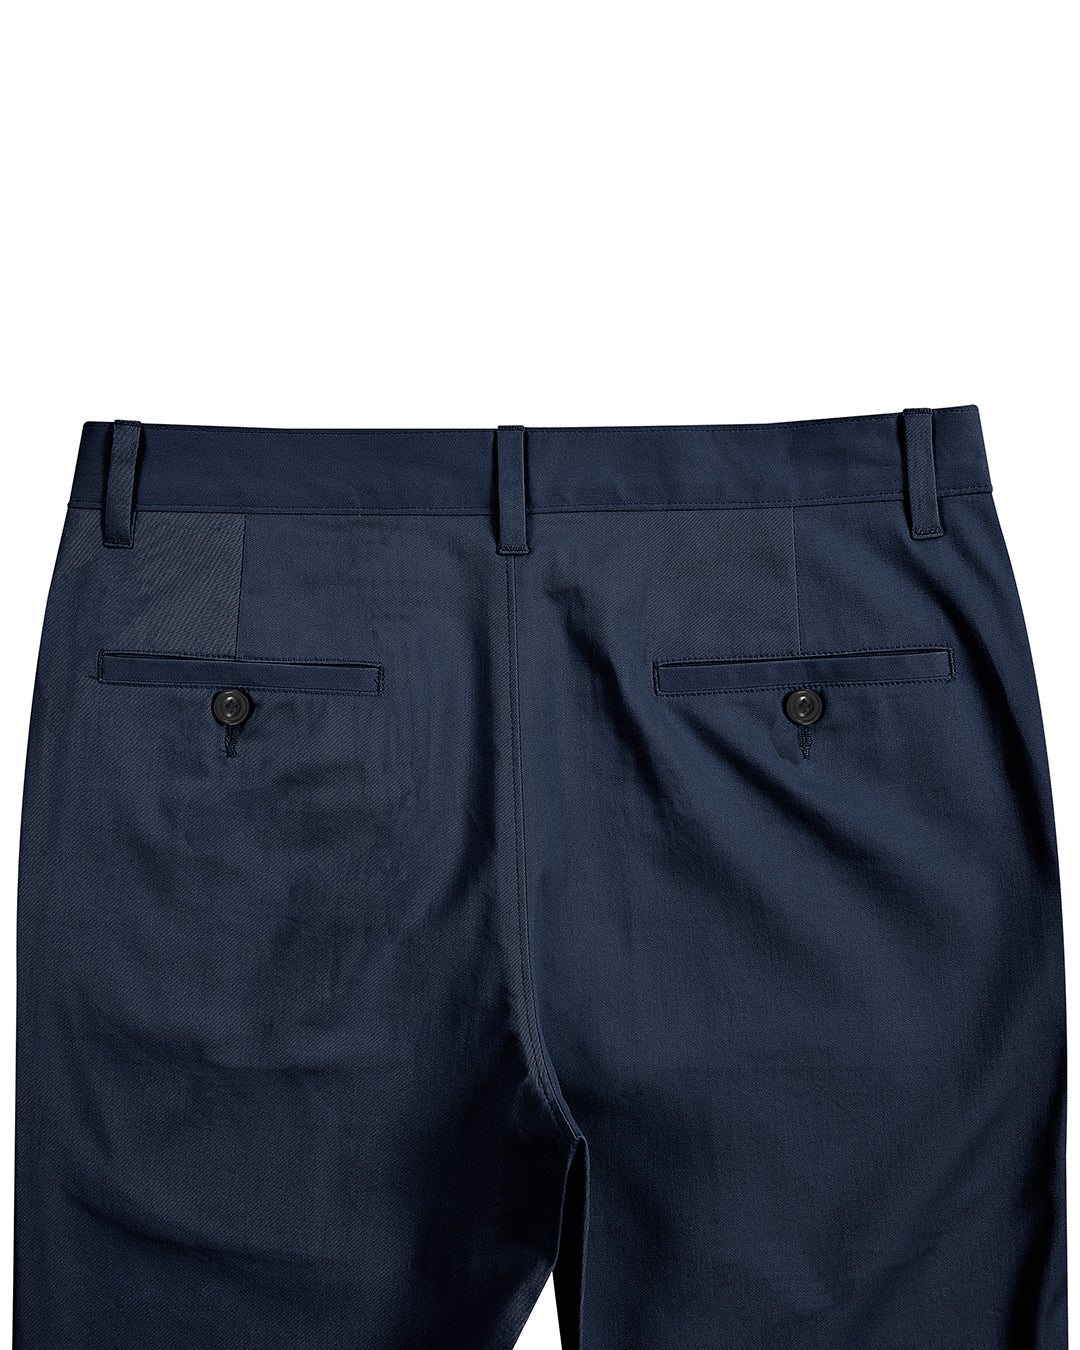 Back view of custom Genoa Chino pants for men by Luxire in midnight blue